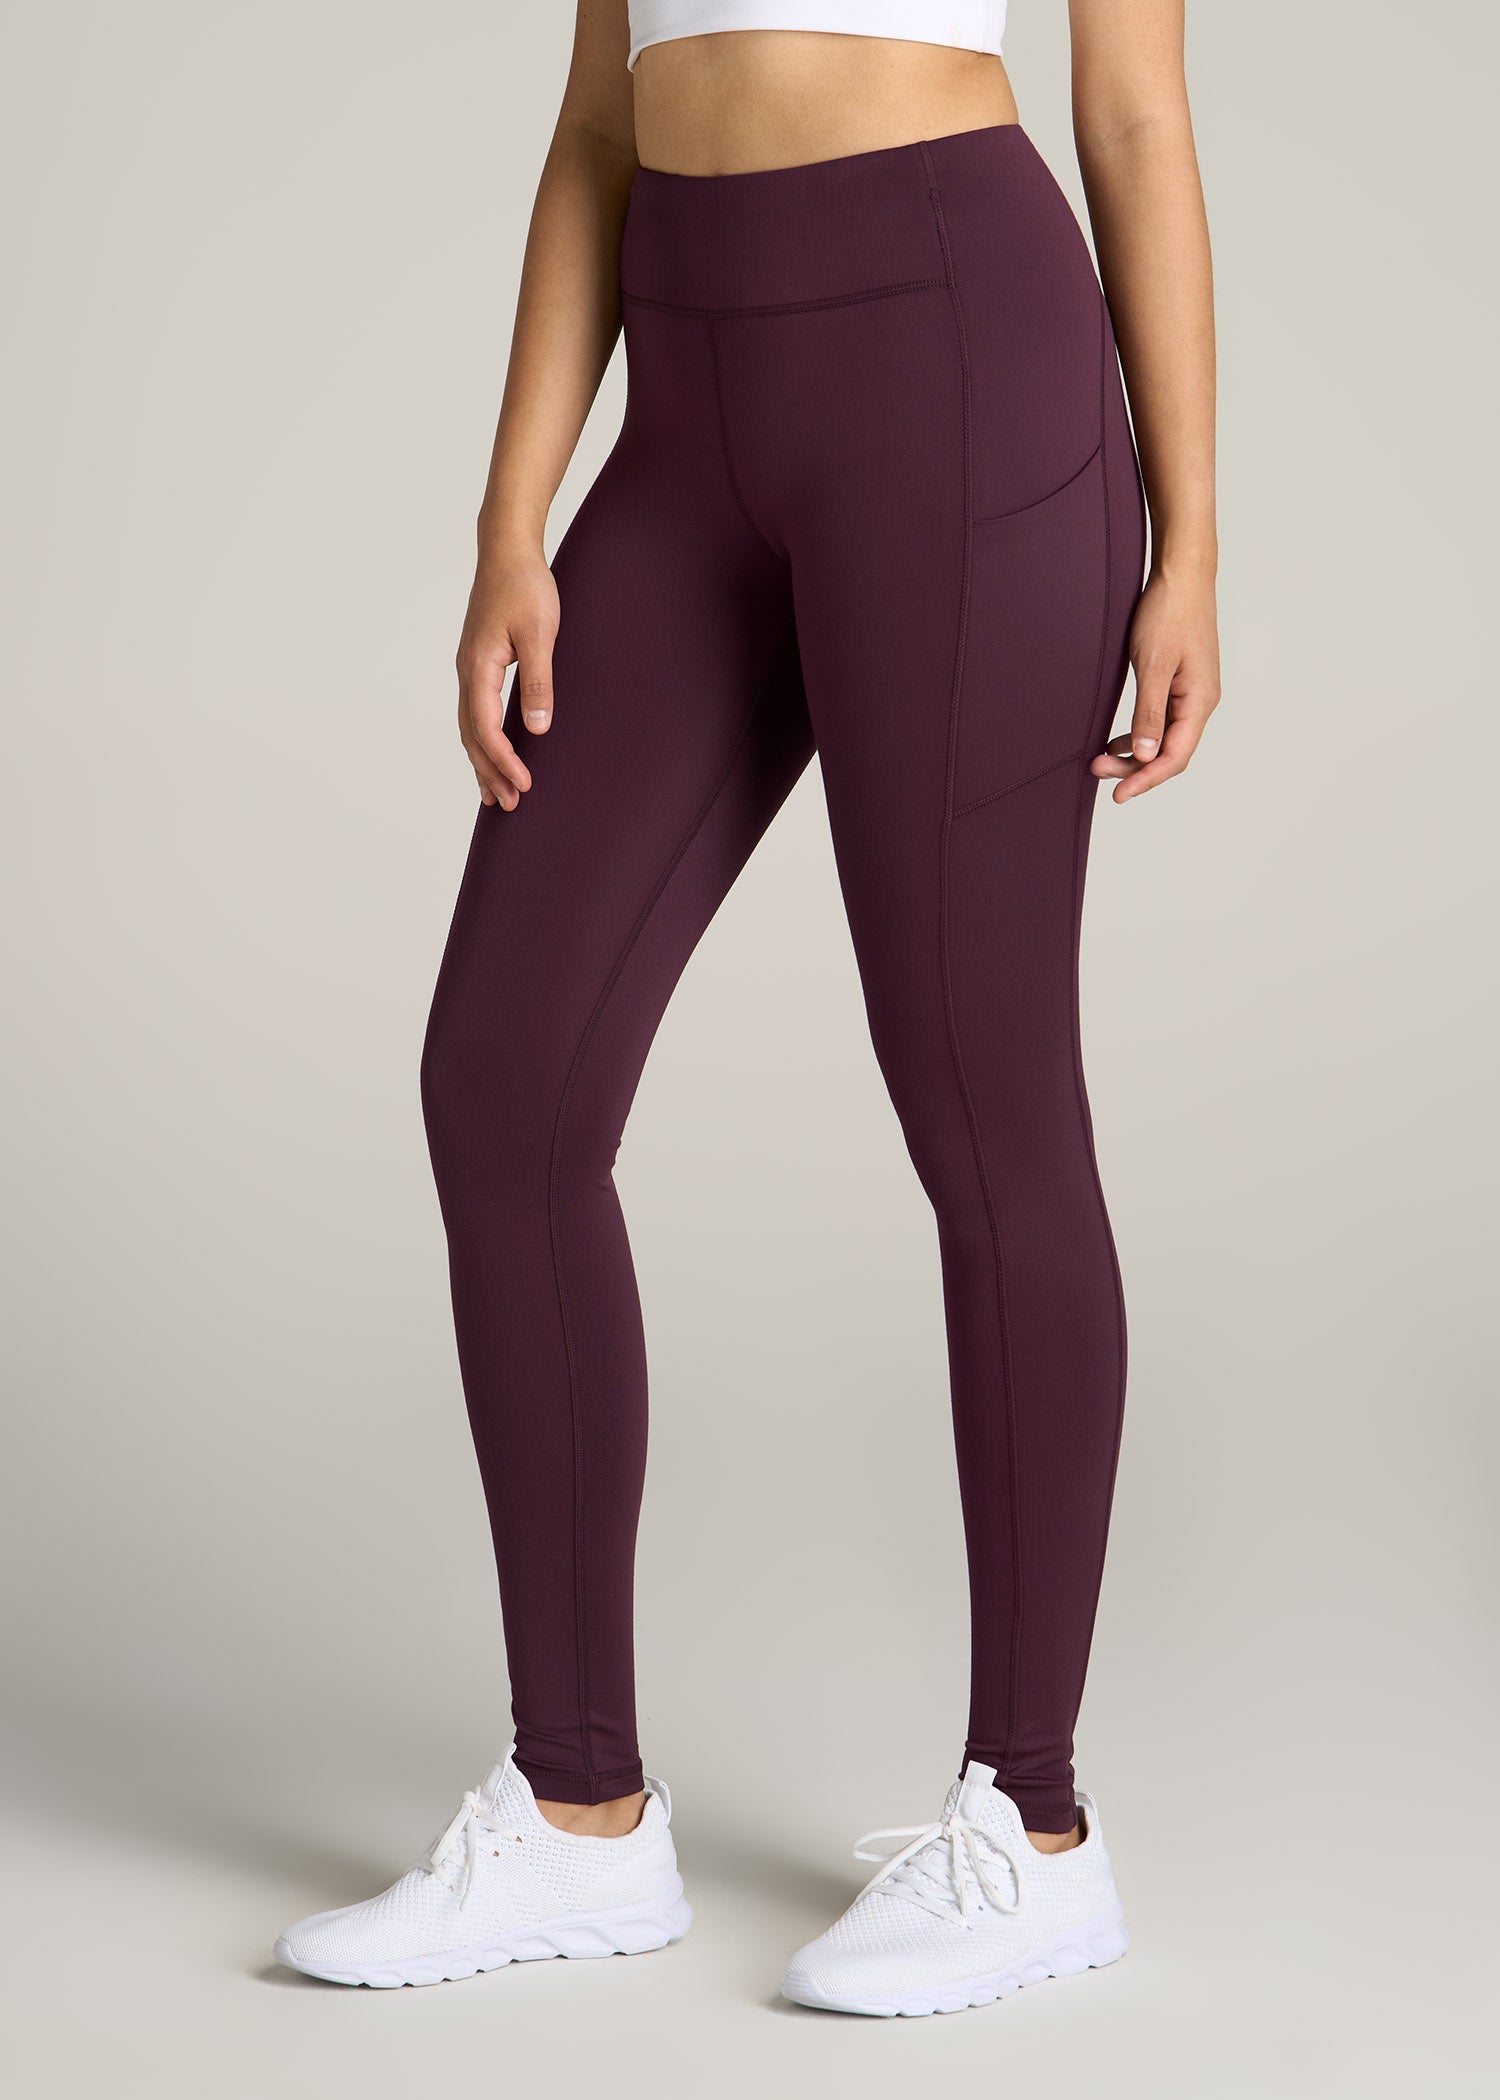 Women's Active Tall Leggings with Pockets in Purple Dahlia